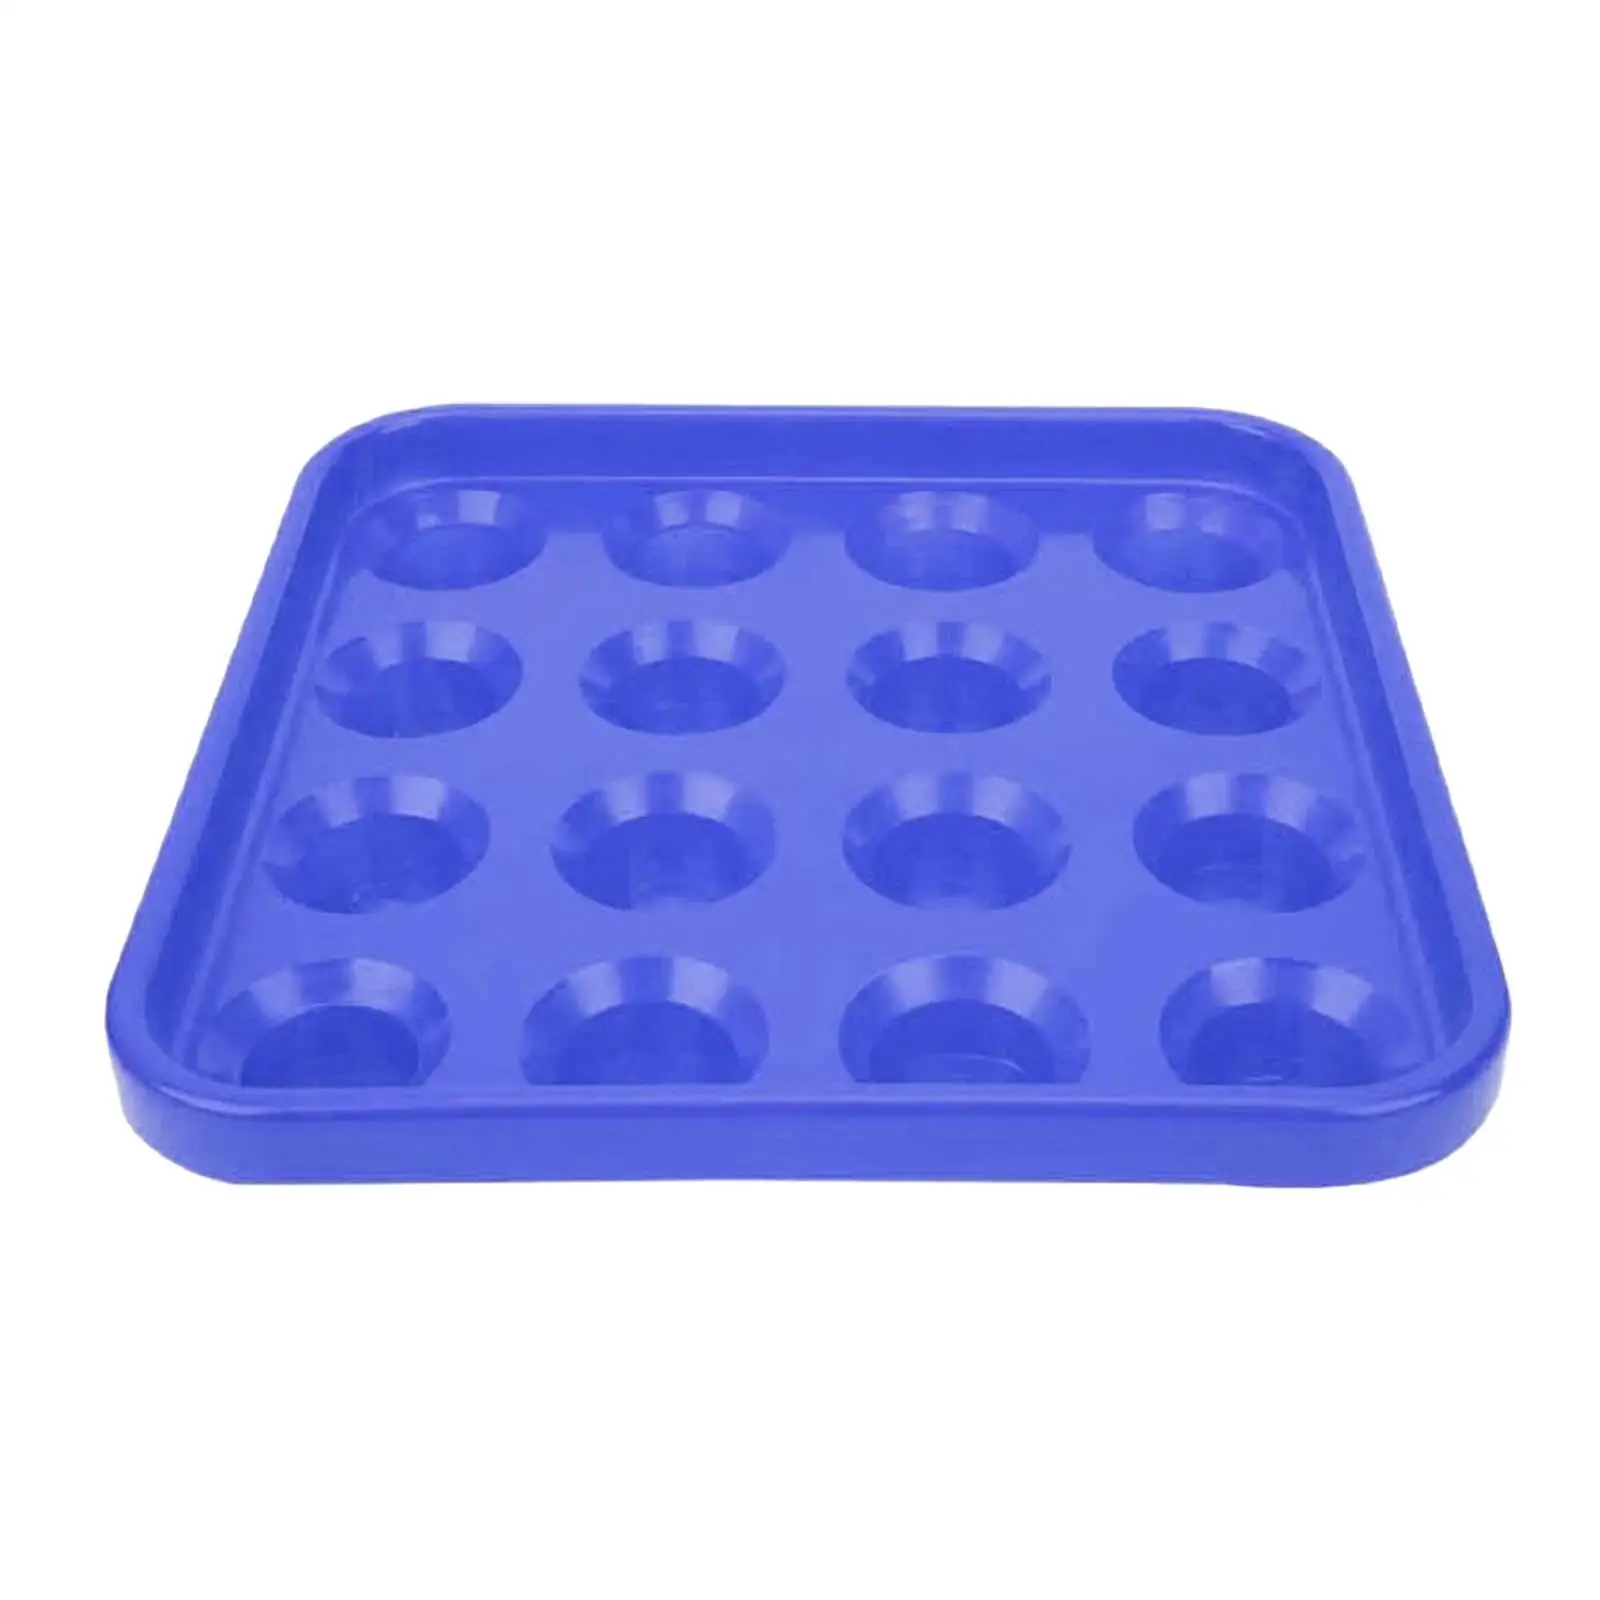 Billiard Ball Holder Tray Pool Accessory, 16 Holes Case, Snooker Pool Halls Game Room Portable Anti Drop Pool Ball Tray